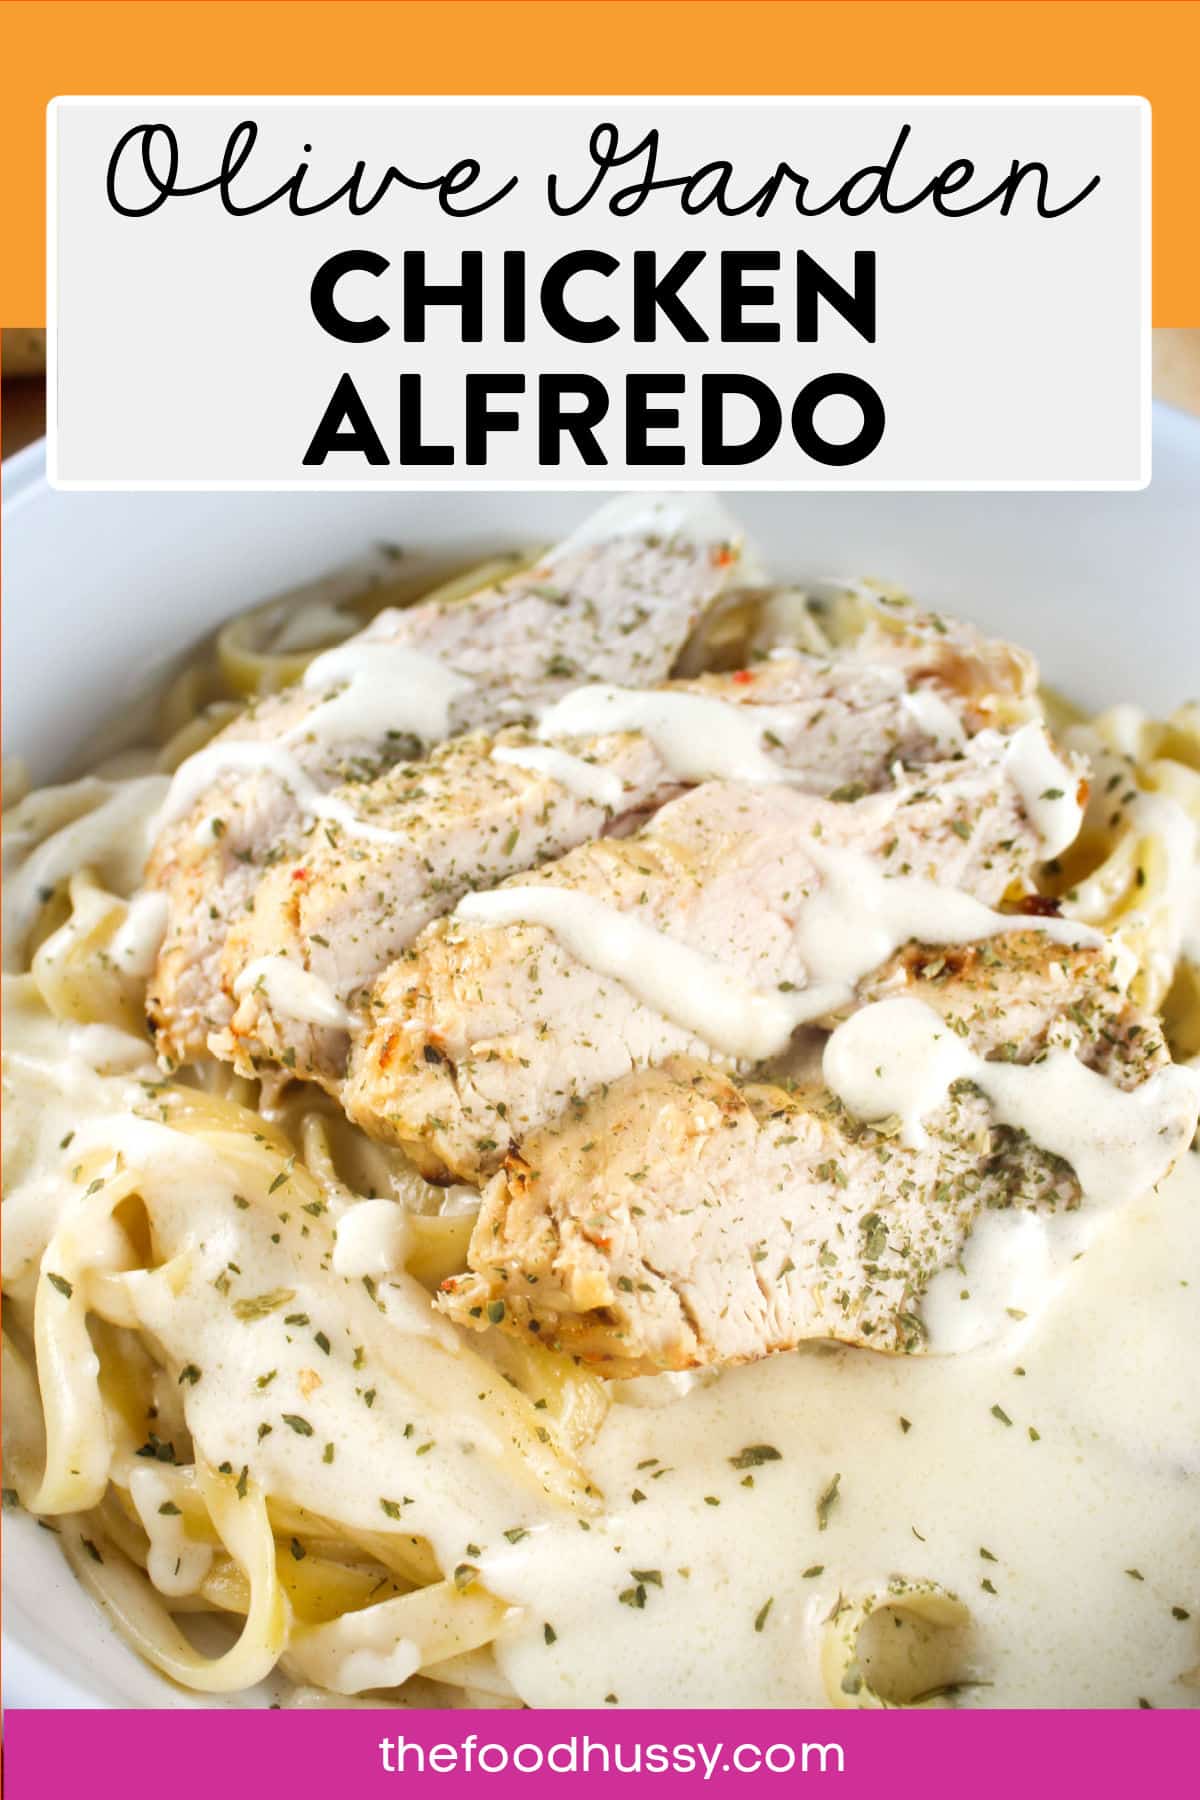 Olive Garden Chicken Alfredo is an easy pasta dinner and a delicious meal that the whole family will love. It's creamy comfort food and is ready in just 15 minutes!  via @foodhussy